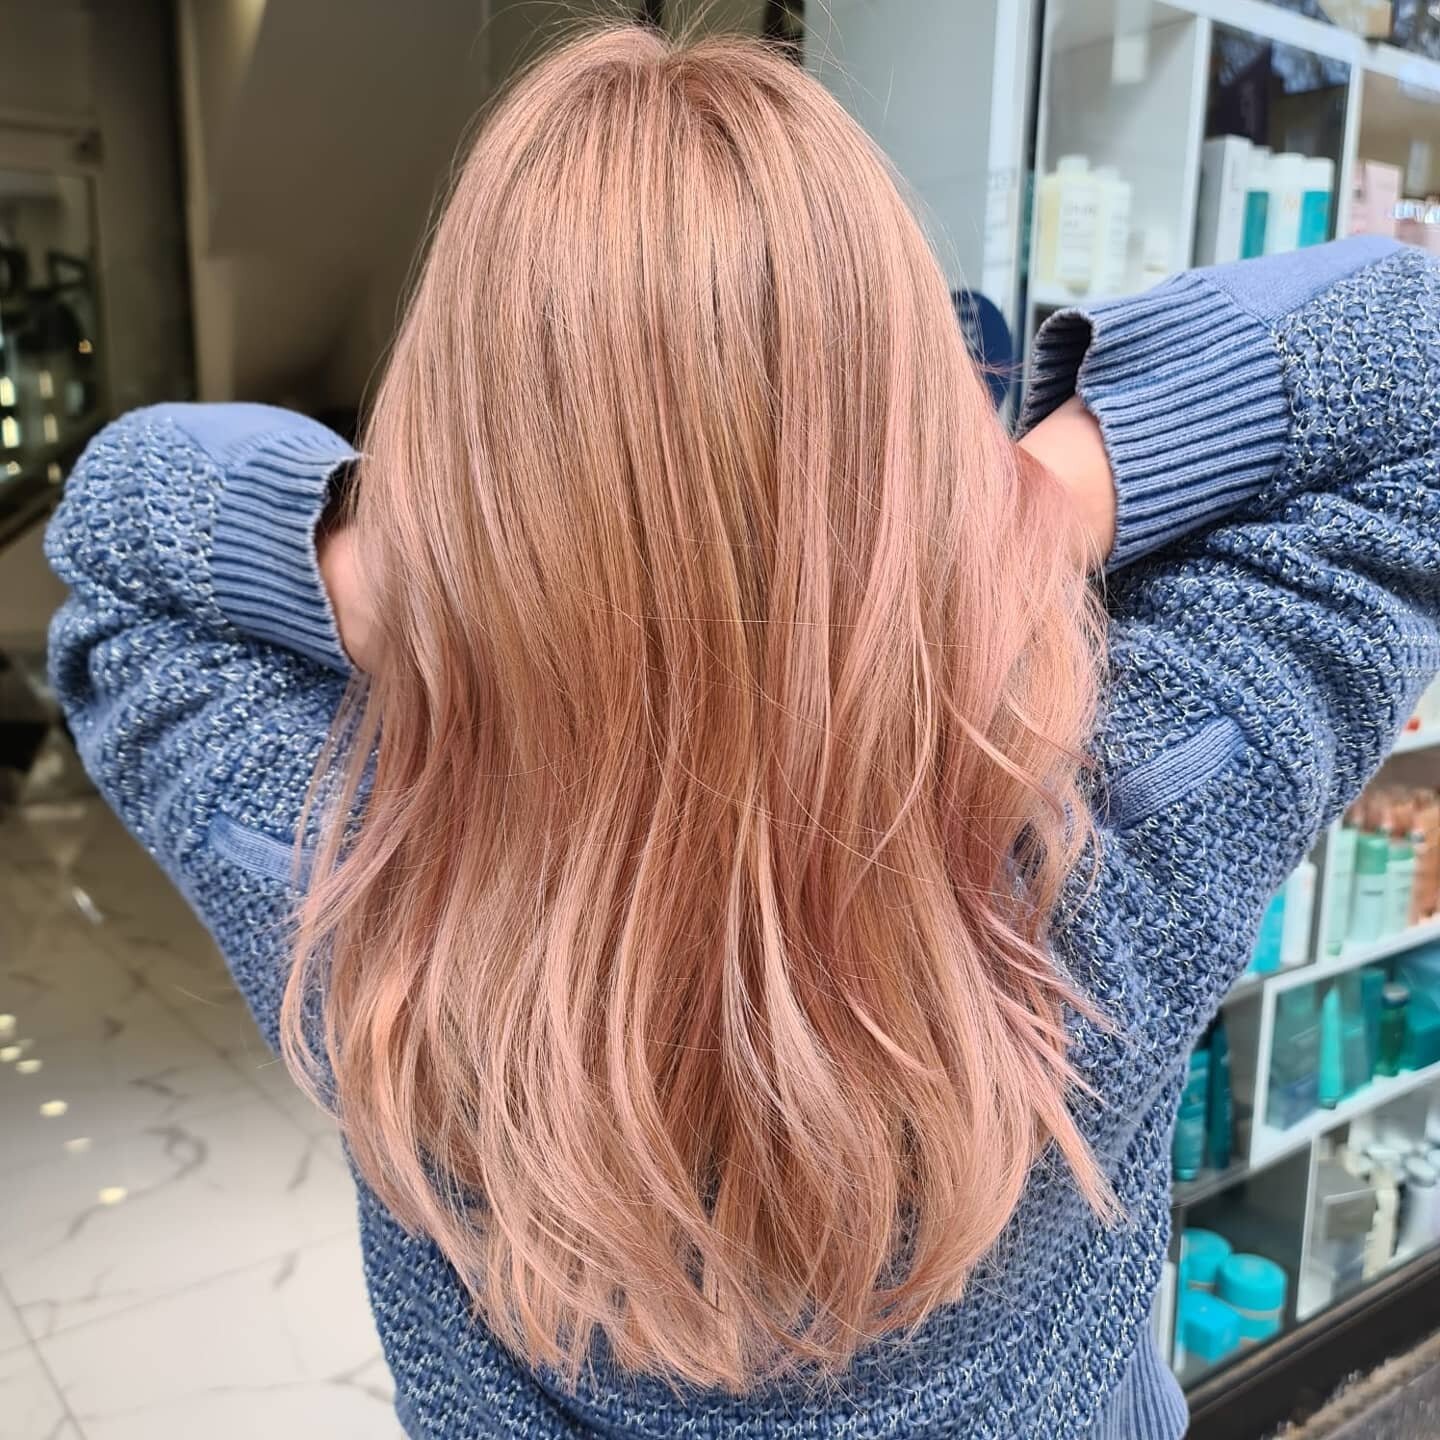 A sophisticated take on 
Candy 🍬 Floss hair...
Perfect for our up and coming strawberries and cream season. Super Kawaii!

Colour: Rose Gold Milksake
 @loreal @lorealpro

Chopped and styled and coloured by
@beatacastielhair
.
.
.
.
.
.
.
.
.
.
#lore